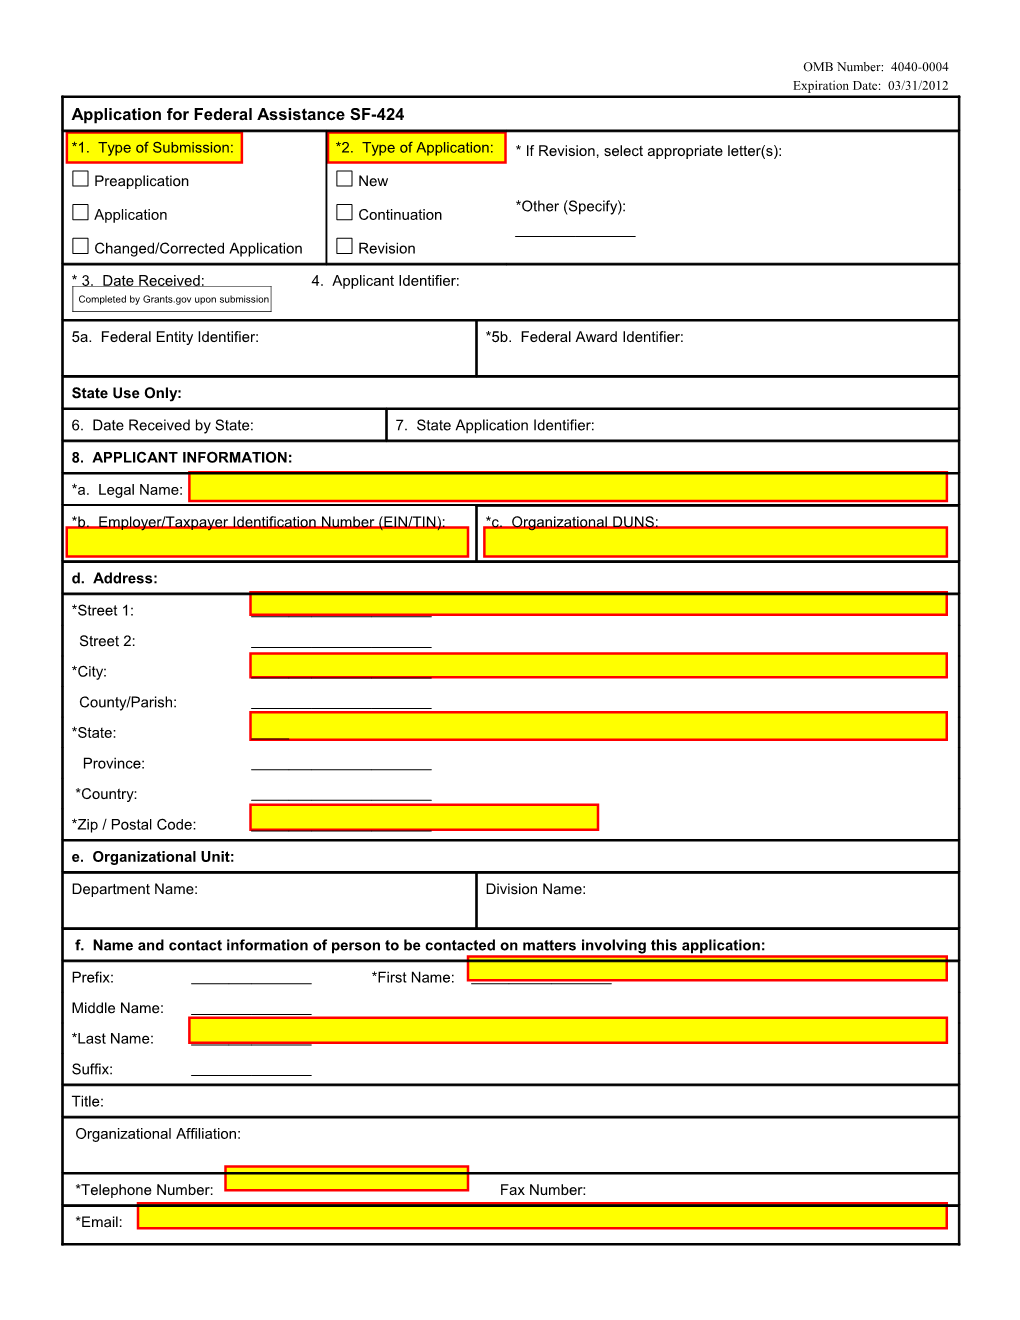 Application for Financial Assistance - SF Form 424 (MS Word)